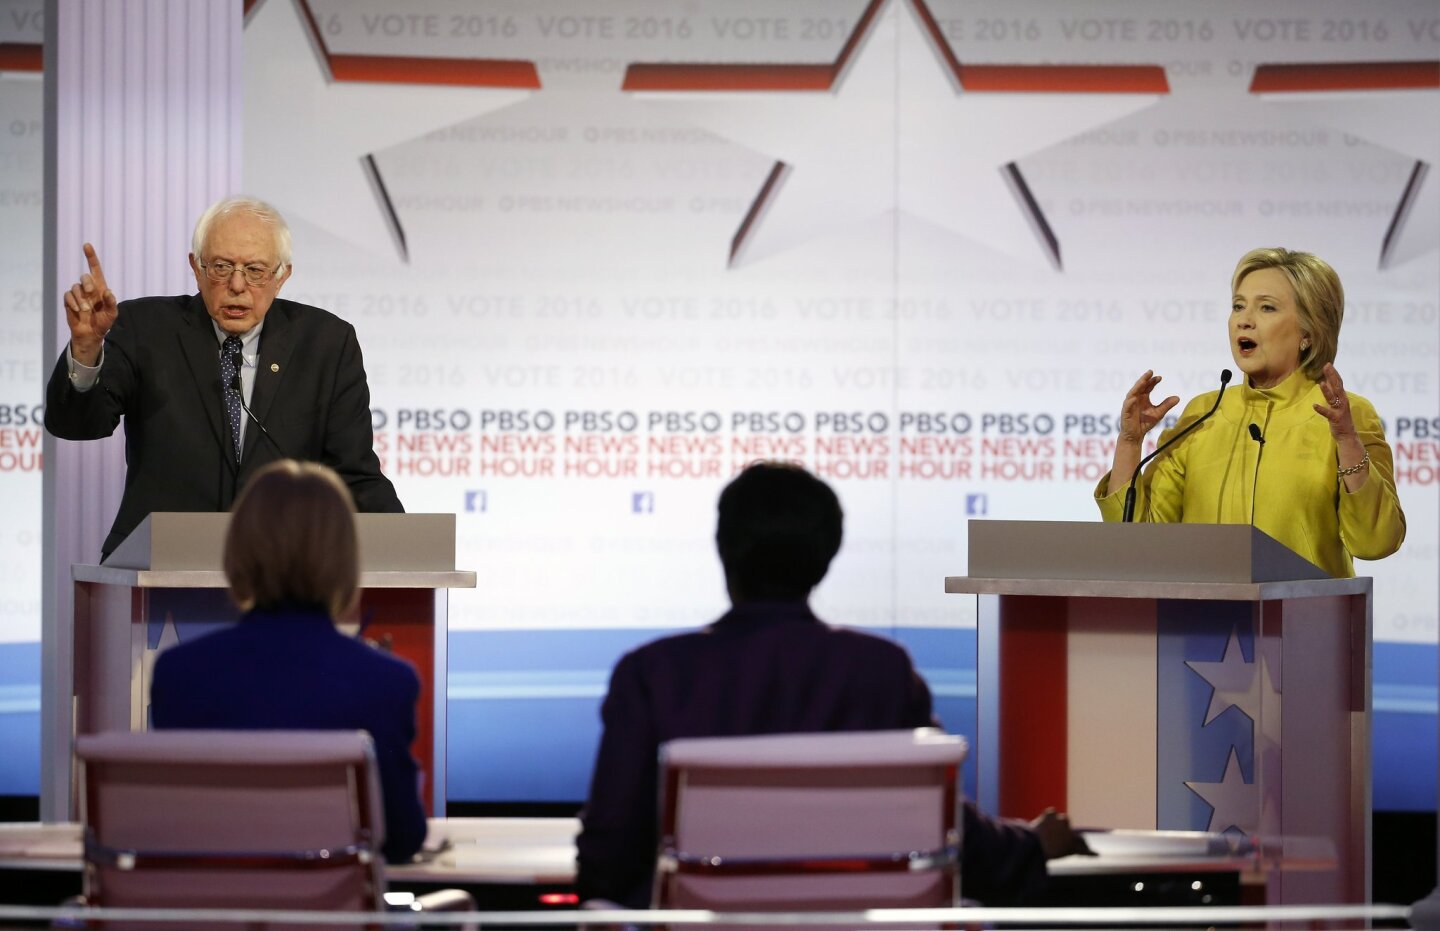 Candidates Sen. Bernie Sanders and Hillary Clinton argue a point during the Democratic presidential primary debate at the University of Wisconsin-Milwaukee.